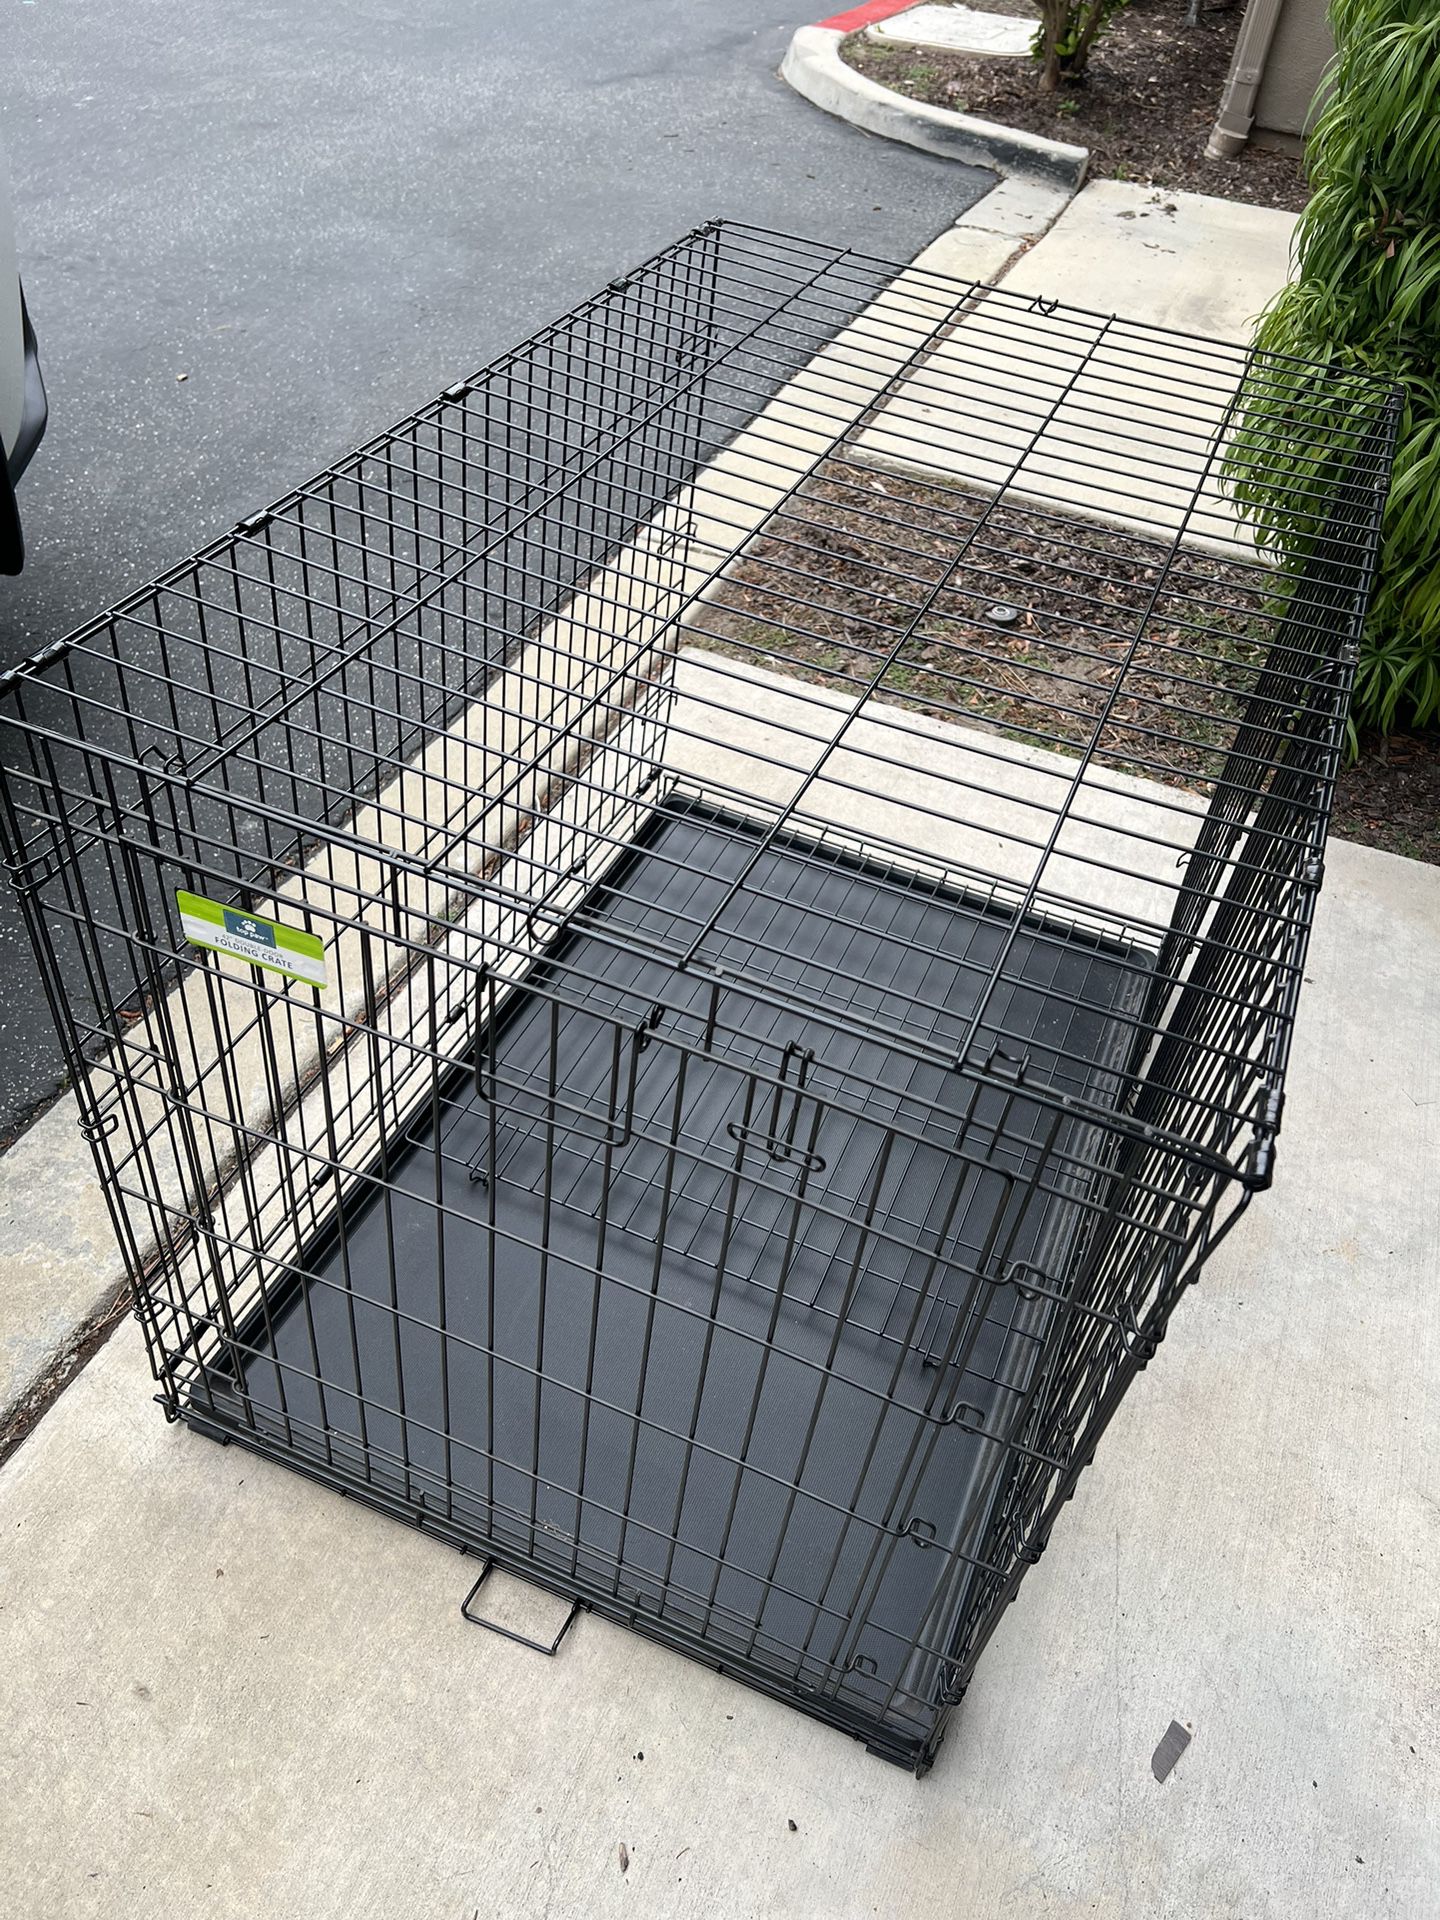 XL Collapsible Dog Kennel/Crate